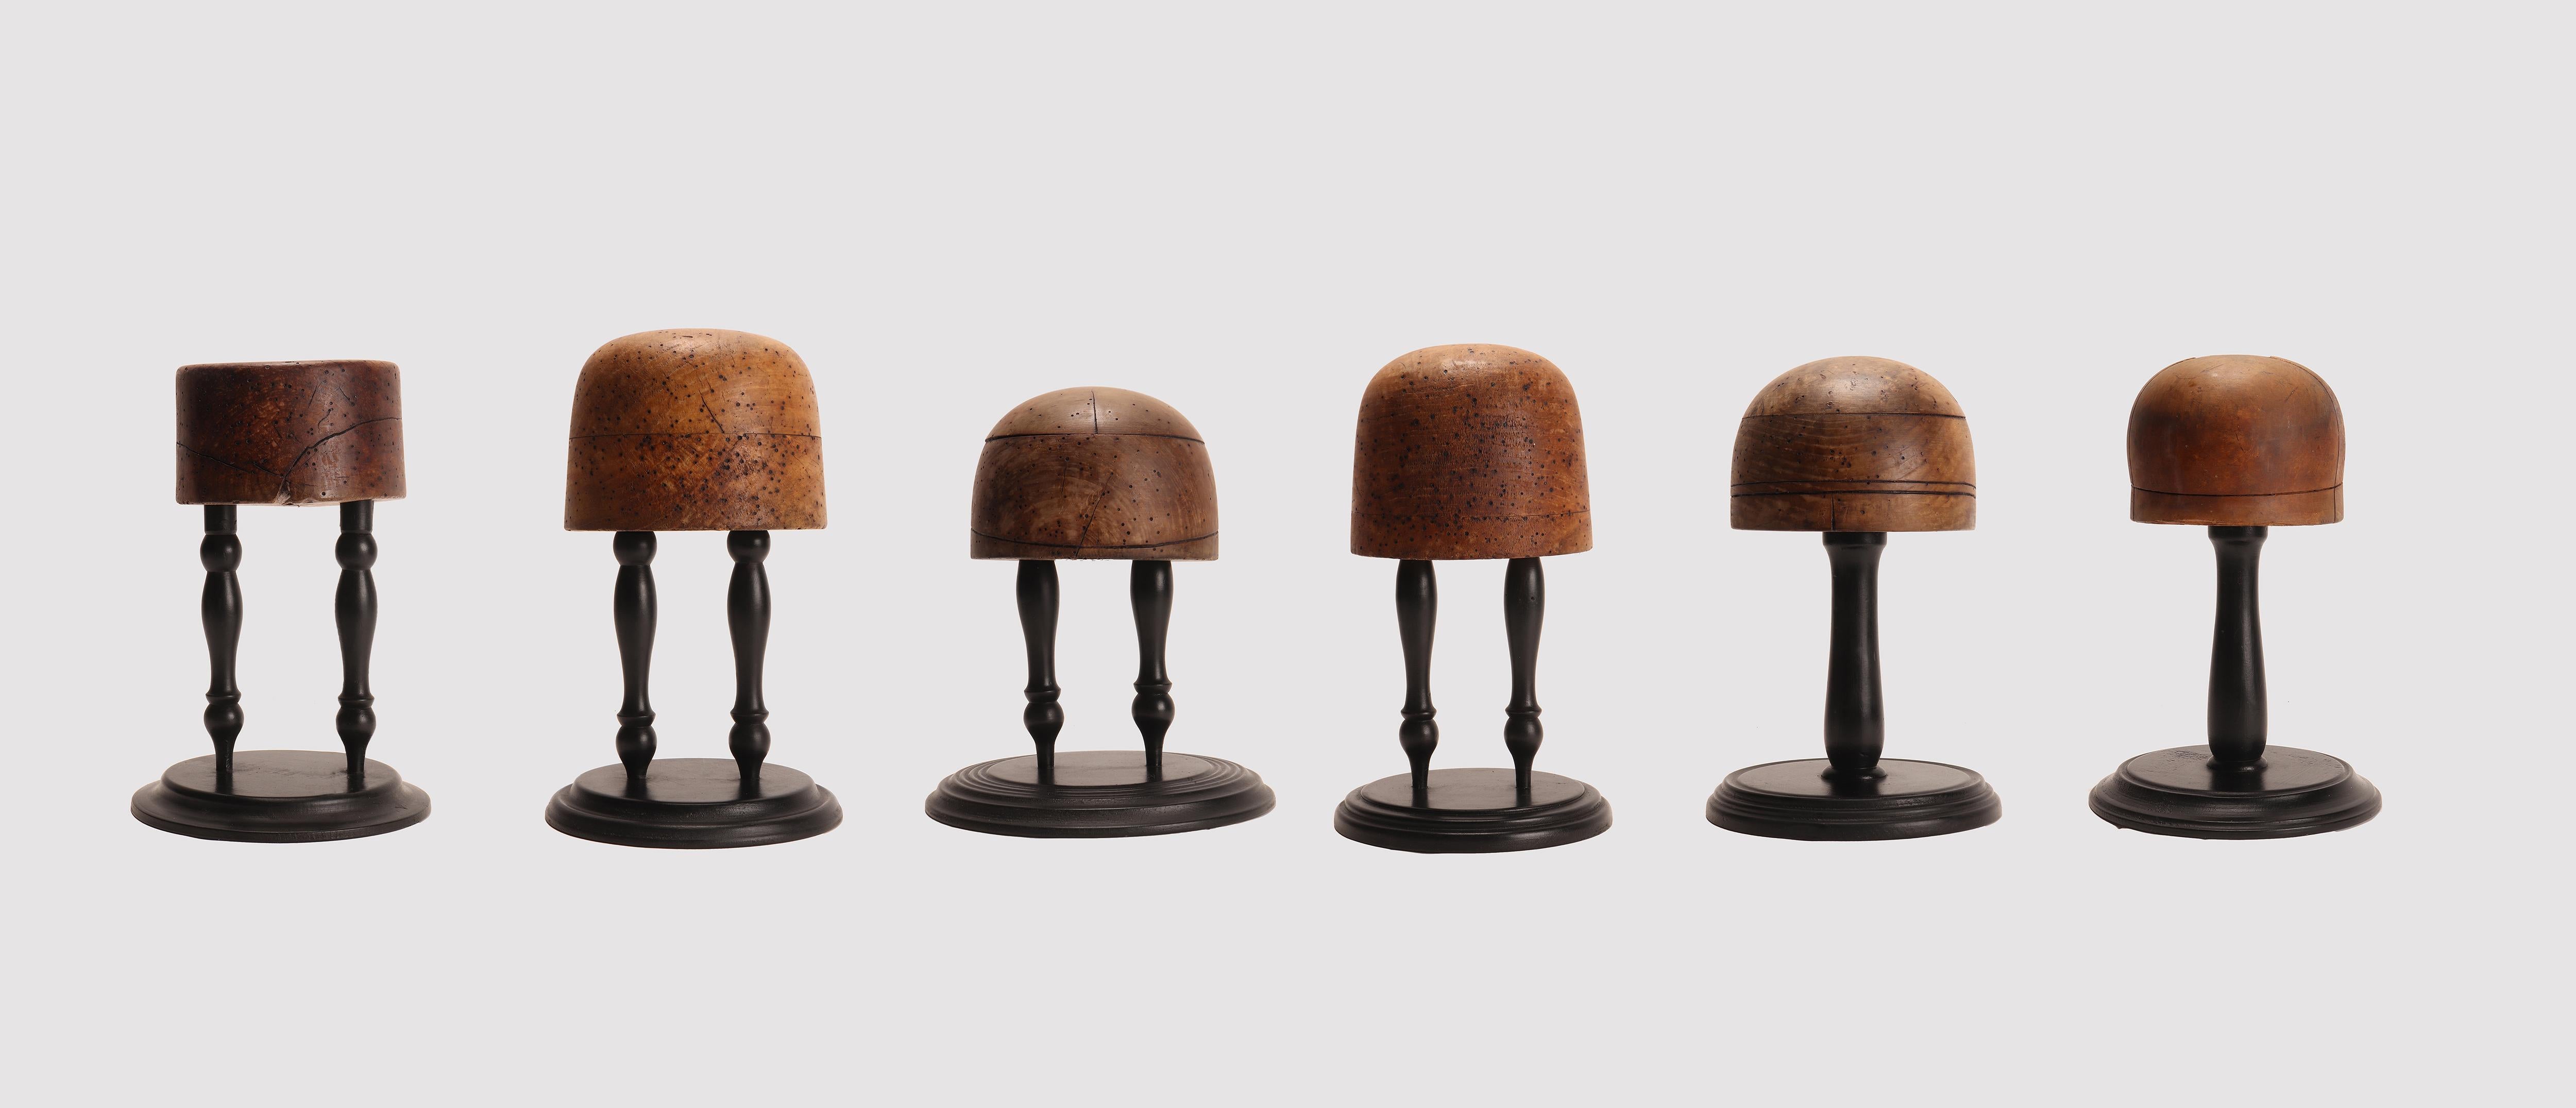 Group of 6 Milliner’s Wooden Molds, Italy 1890 15